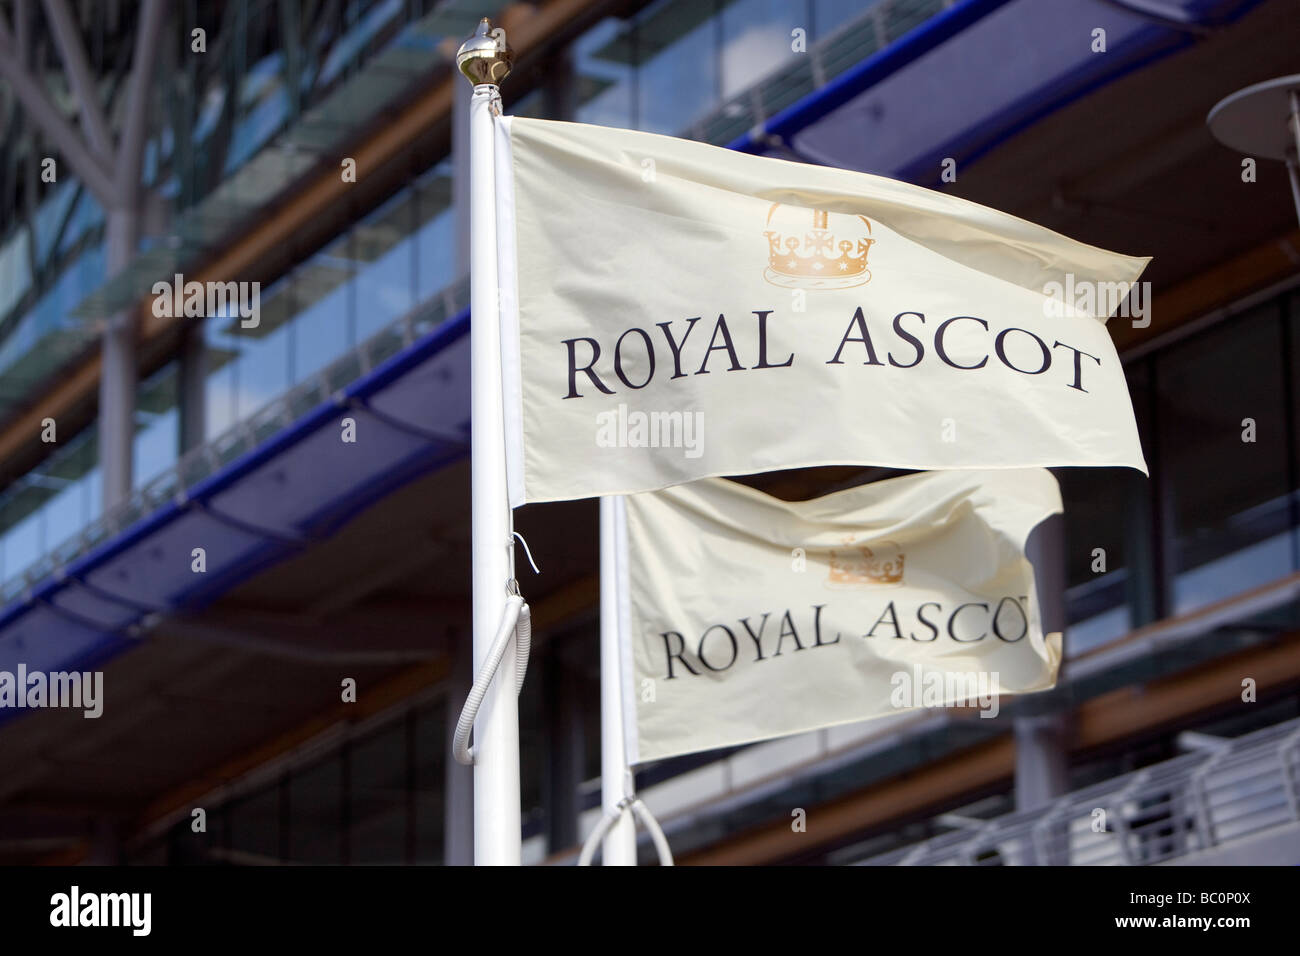 Royal Ascot Race Meeting 2009 two Royal Ascot flags flying in front of the main stand Stock Photo